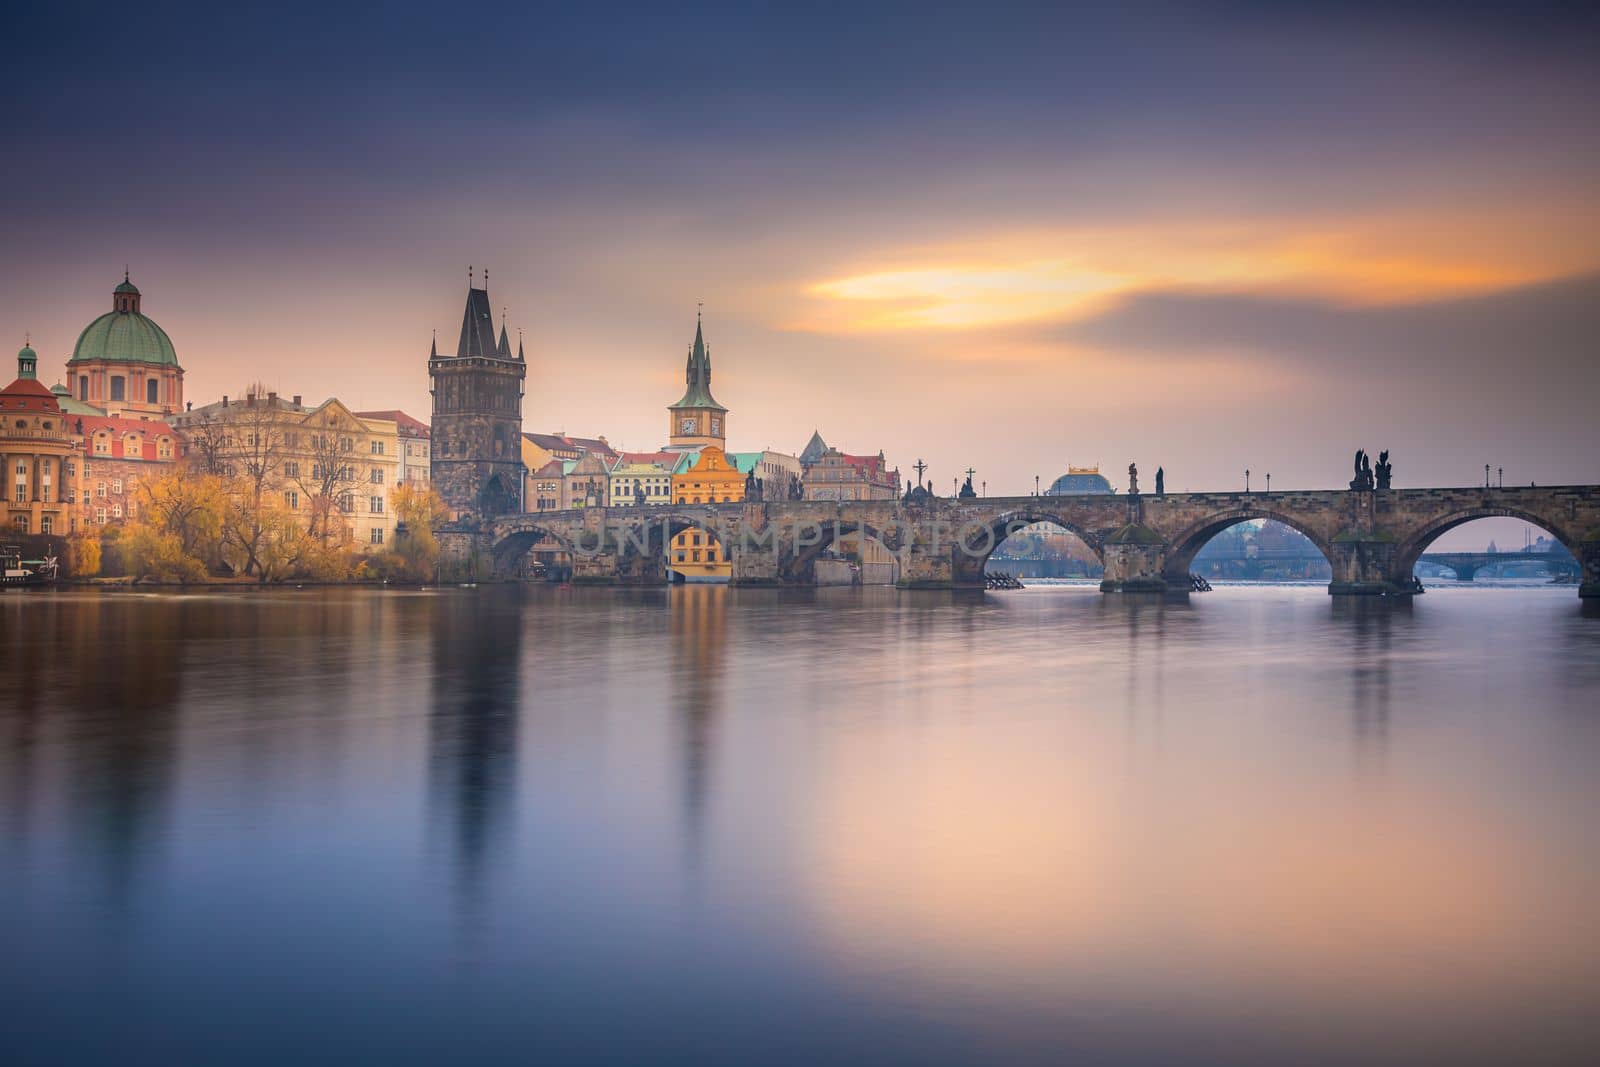 Panoramic view over the cityscape of Prague and Vltava river at dramatic evening, Czech Republic